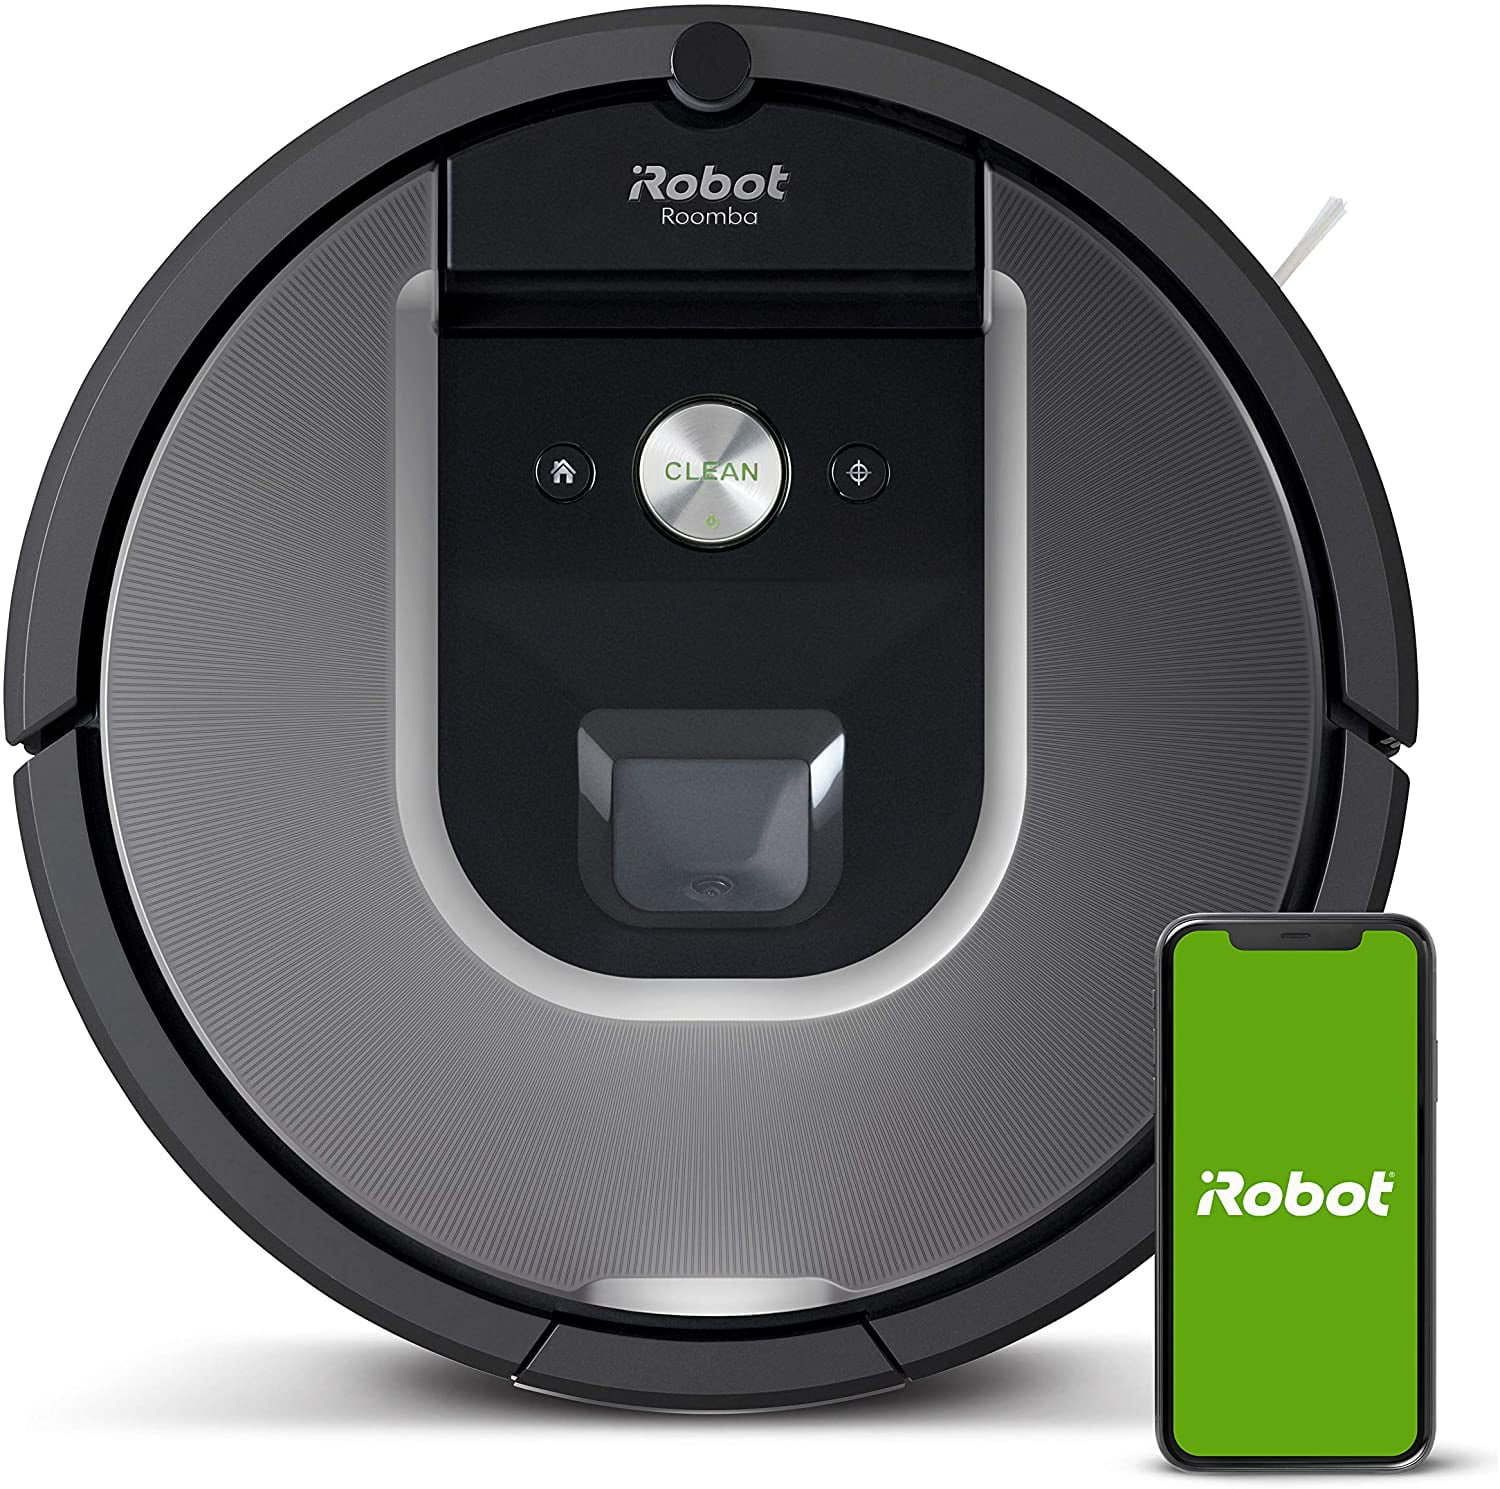 Smart Home and App Control iRobot Roomba 692 Wireless Robot Vacuum Cleaner Dirt Detect Technology Cleaning System with 3 Levels Compatible with Voice Assistants Individual Recommendations